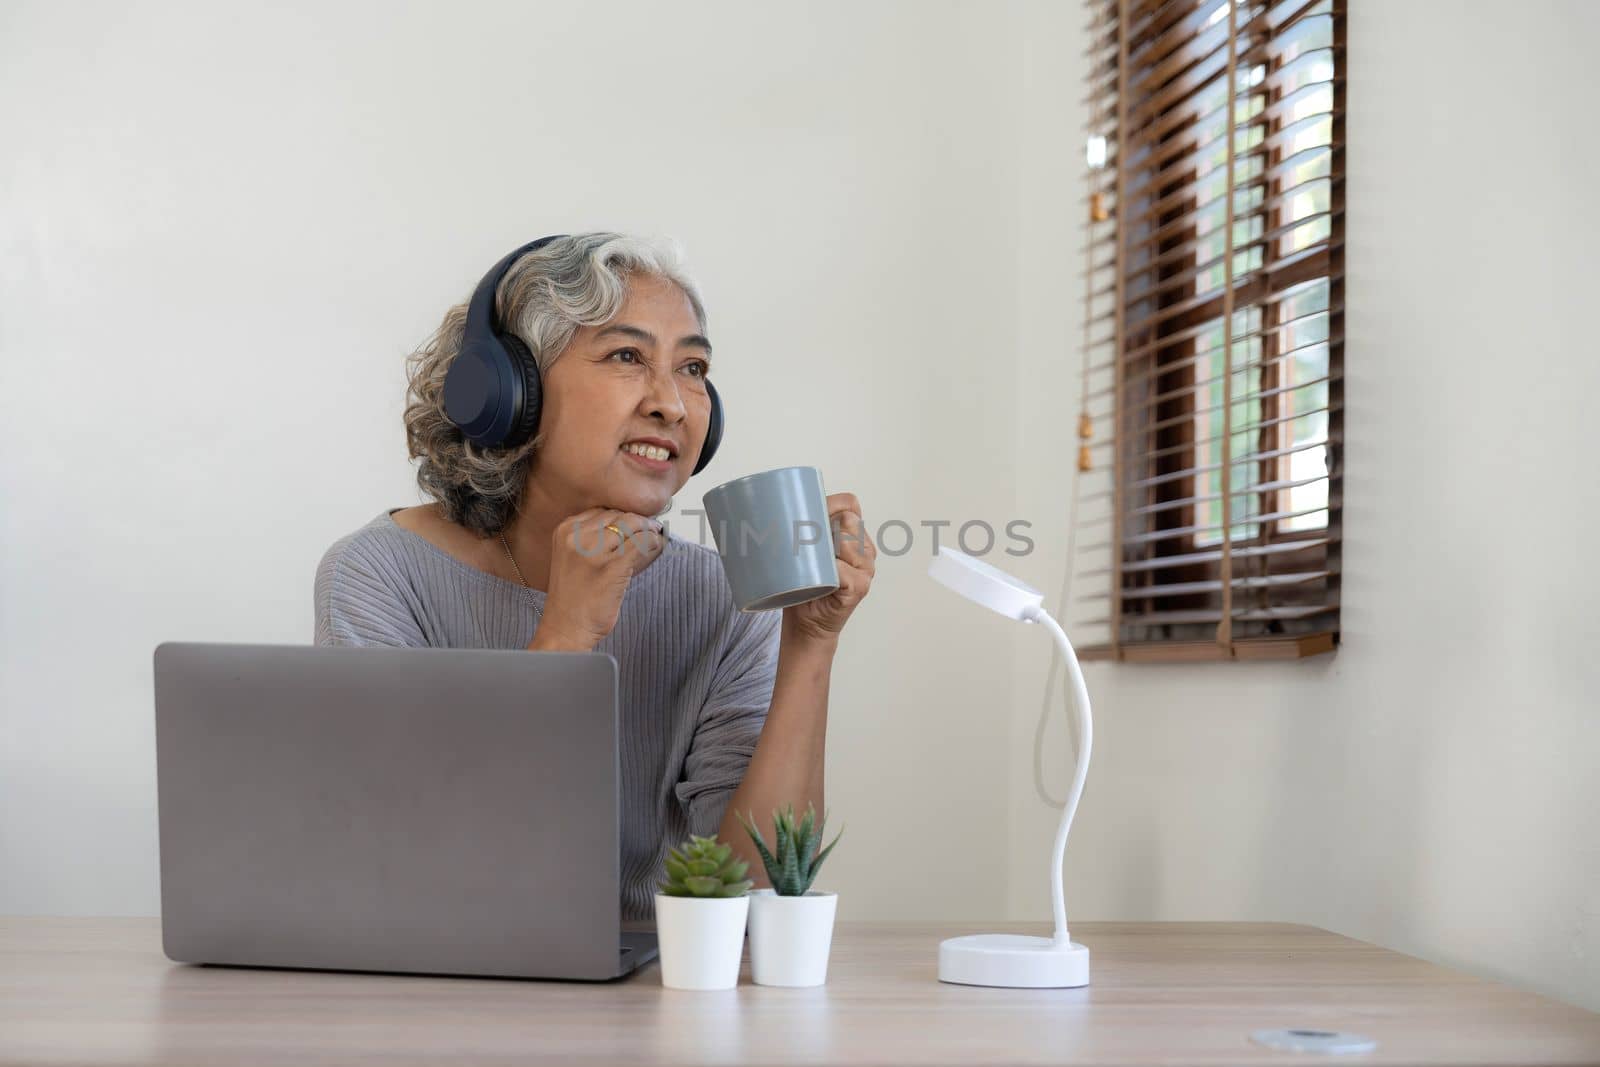 Senior woman using laptop while wearing headphones at home - Joyful elderly lifestyle and technology concept.